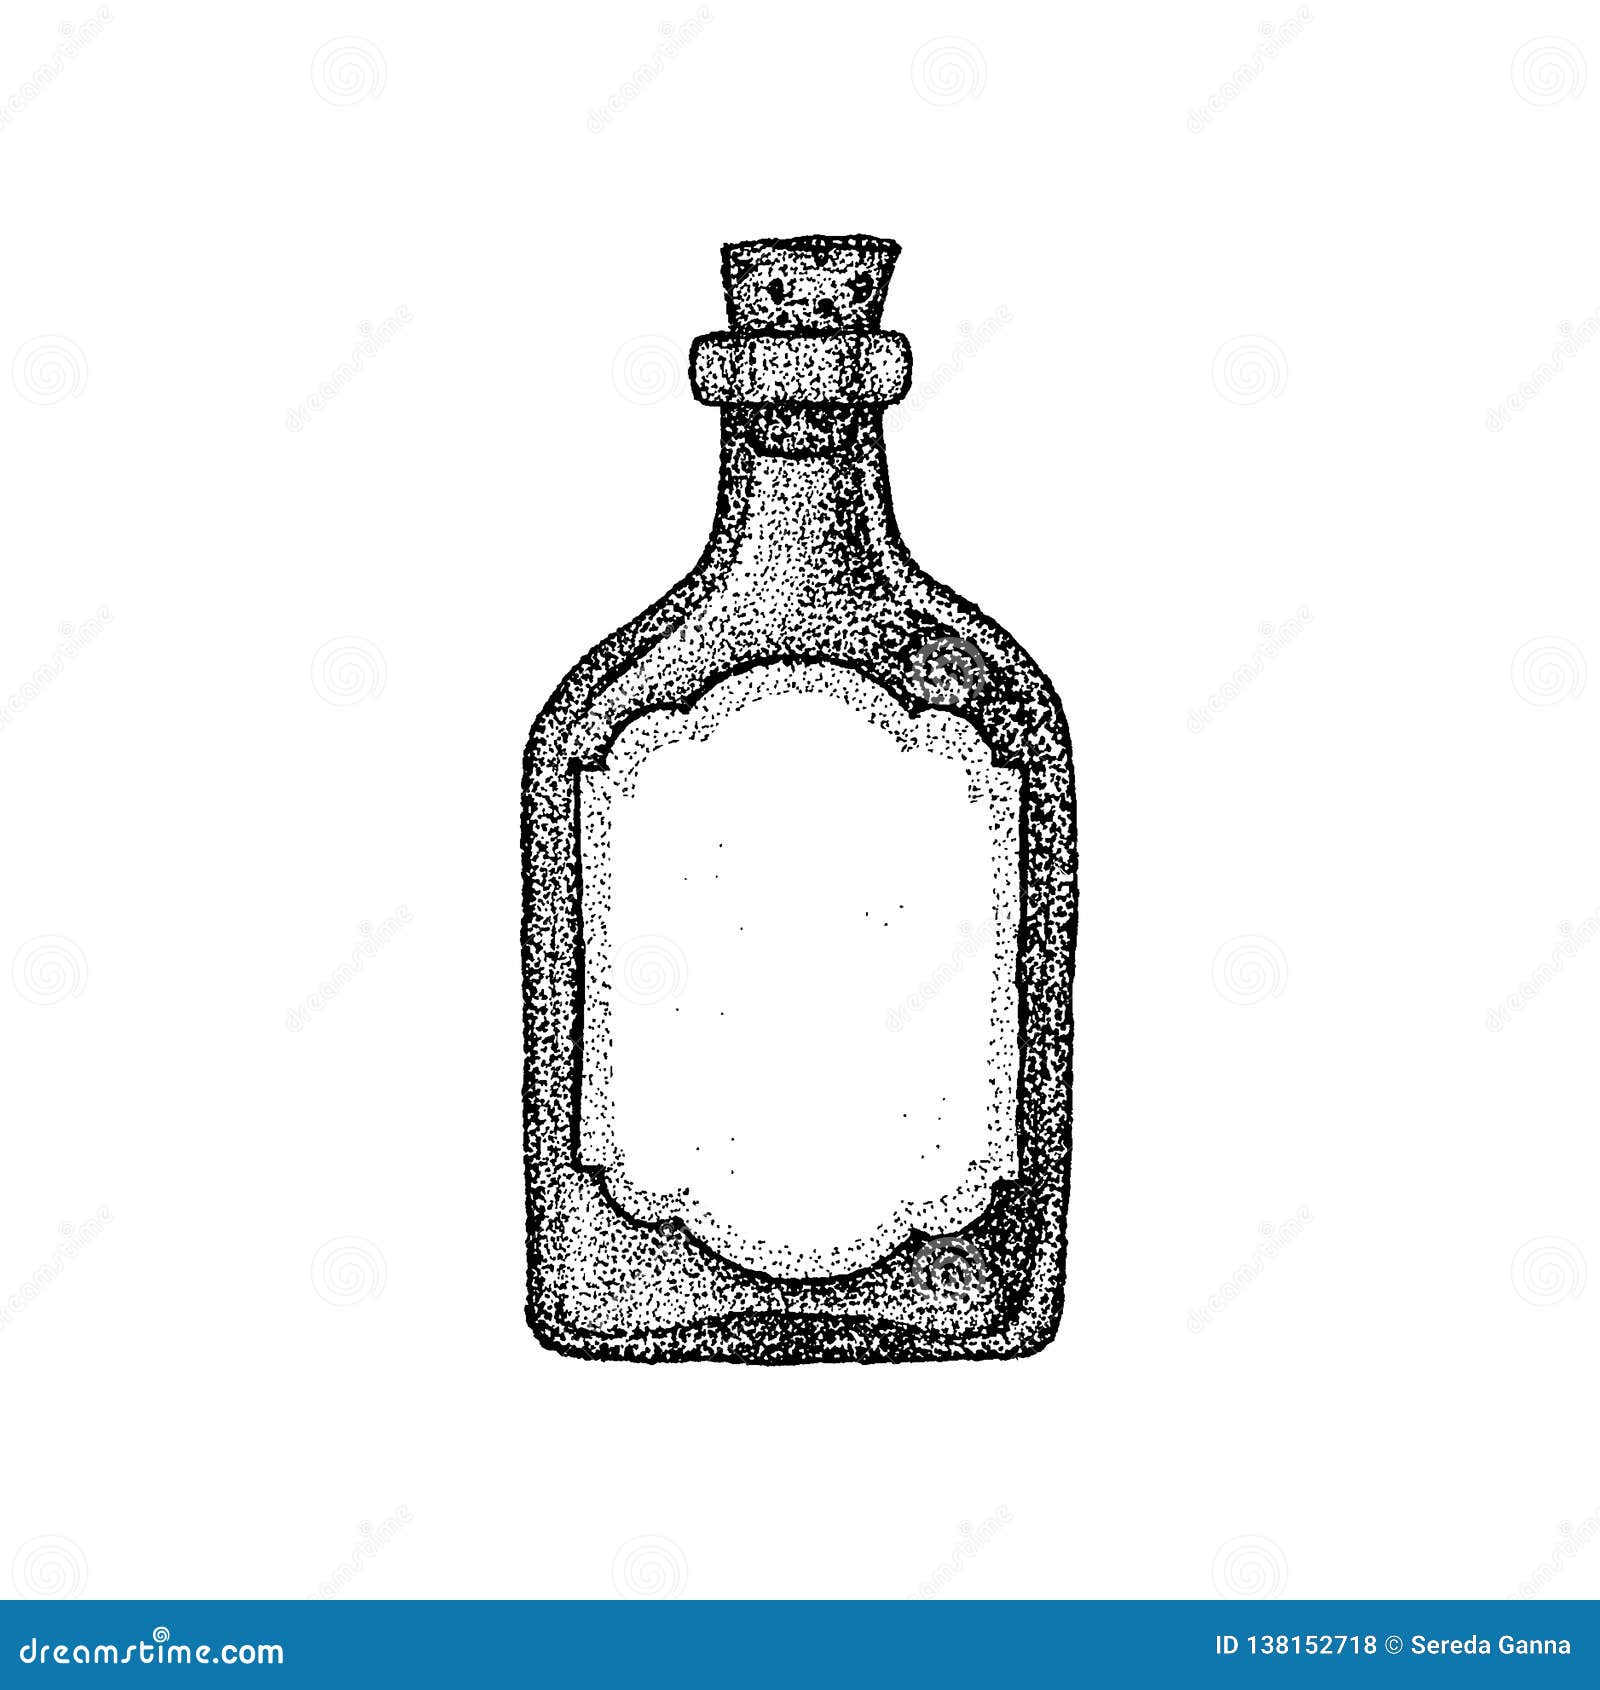 Bottle Of Tequila With Lime And Glass Painted By Hand Stock Vector   Illustration of cocktail object 81674941 in 2023  Tequila Bottle tattoo  Tequila bottles